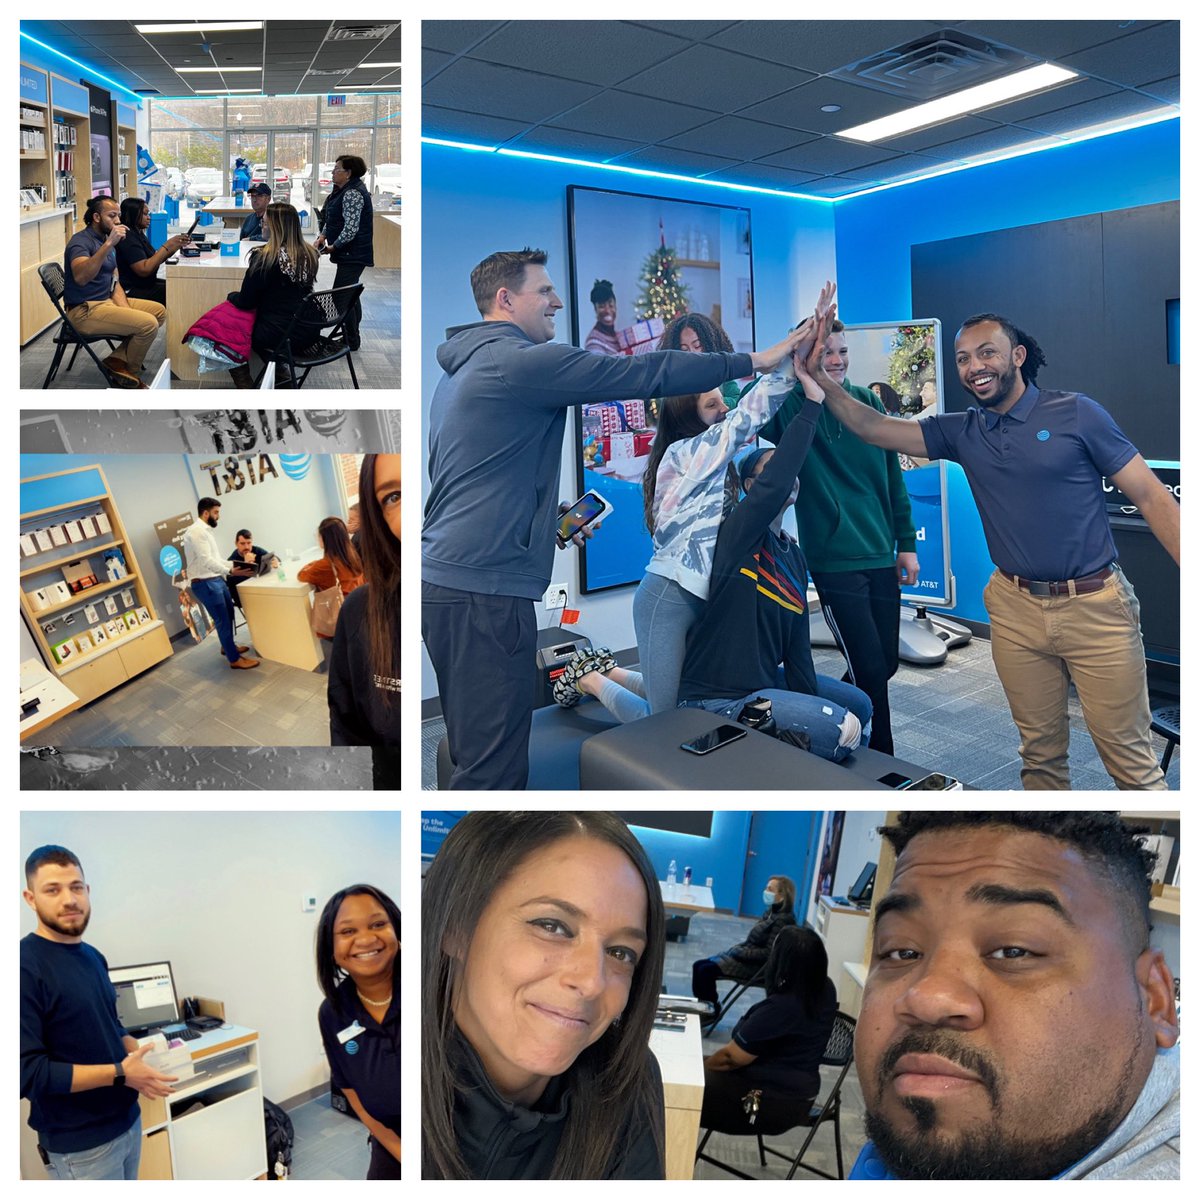 Grand Re-Opening at MWT Riverdale today with @Kennethleach85. The energy here was unmatched💥💥💥@ahmadnasr_mwt #SignatureSizzlers #sERve1st #OneNYNJ @jessicamcarval @Vinecia_F